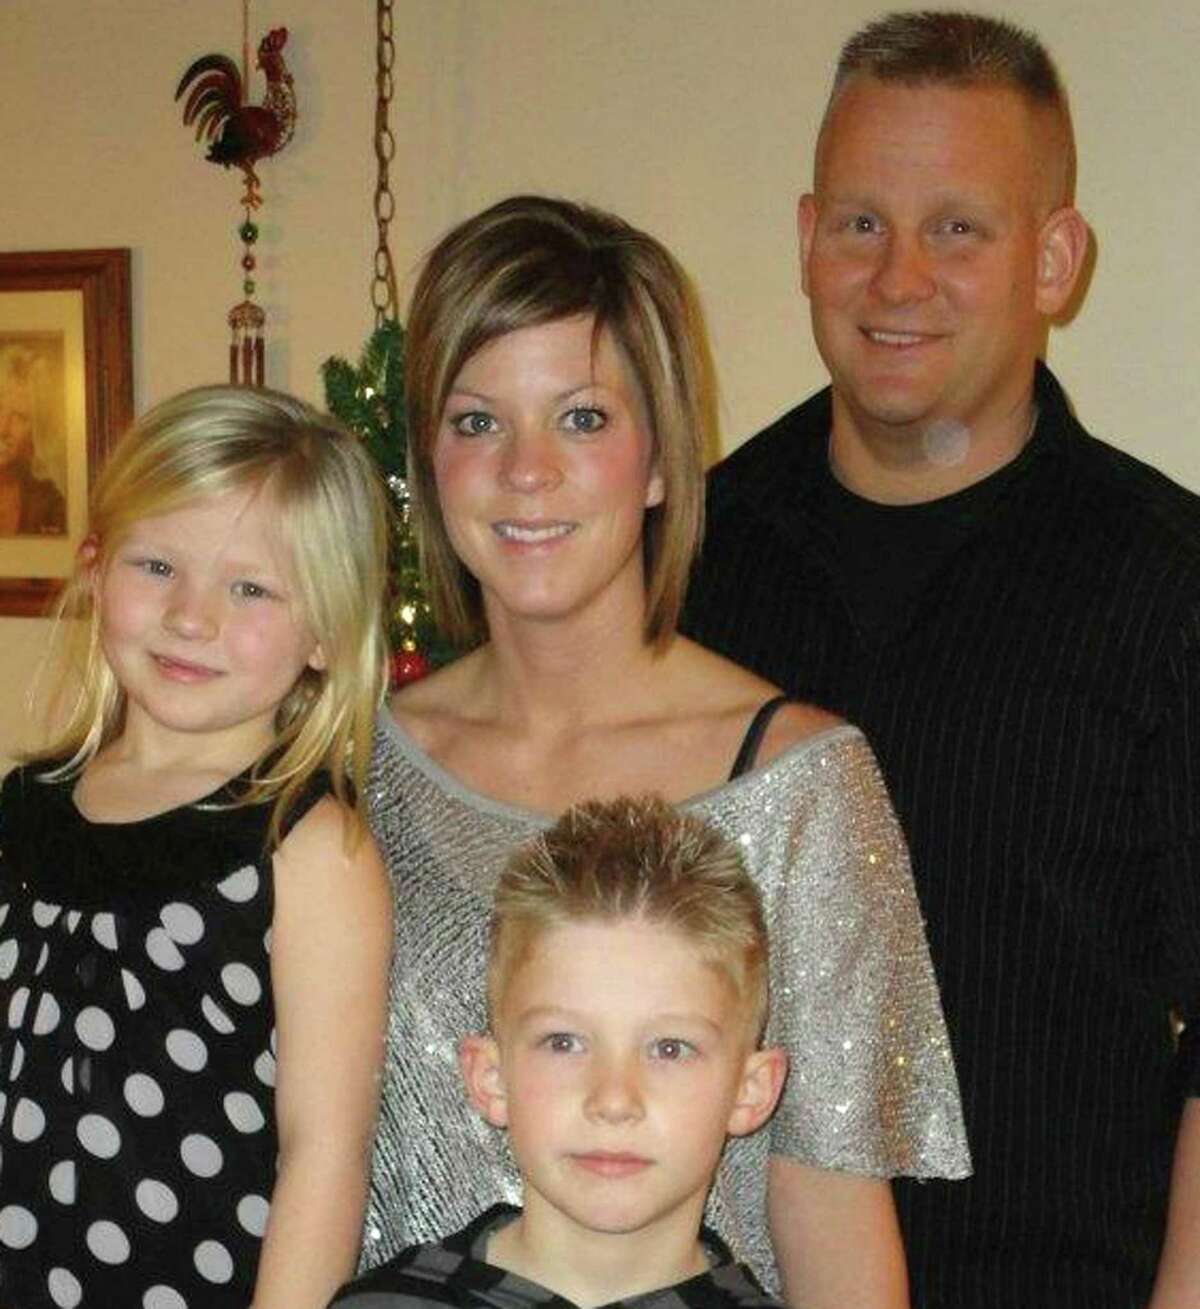 Dental assistant Melissa Nelson, shown with her family, was fired at the dentist's wife's request.